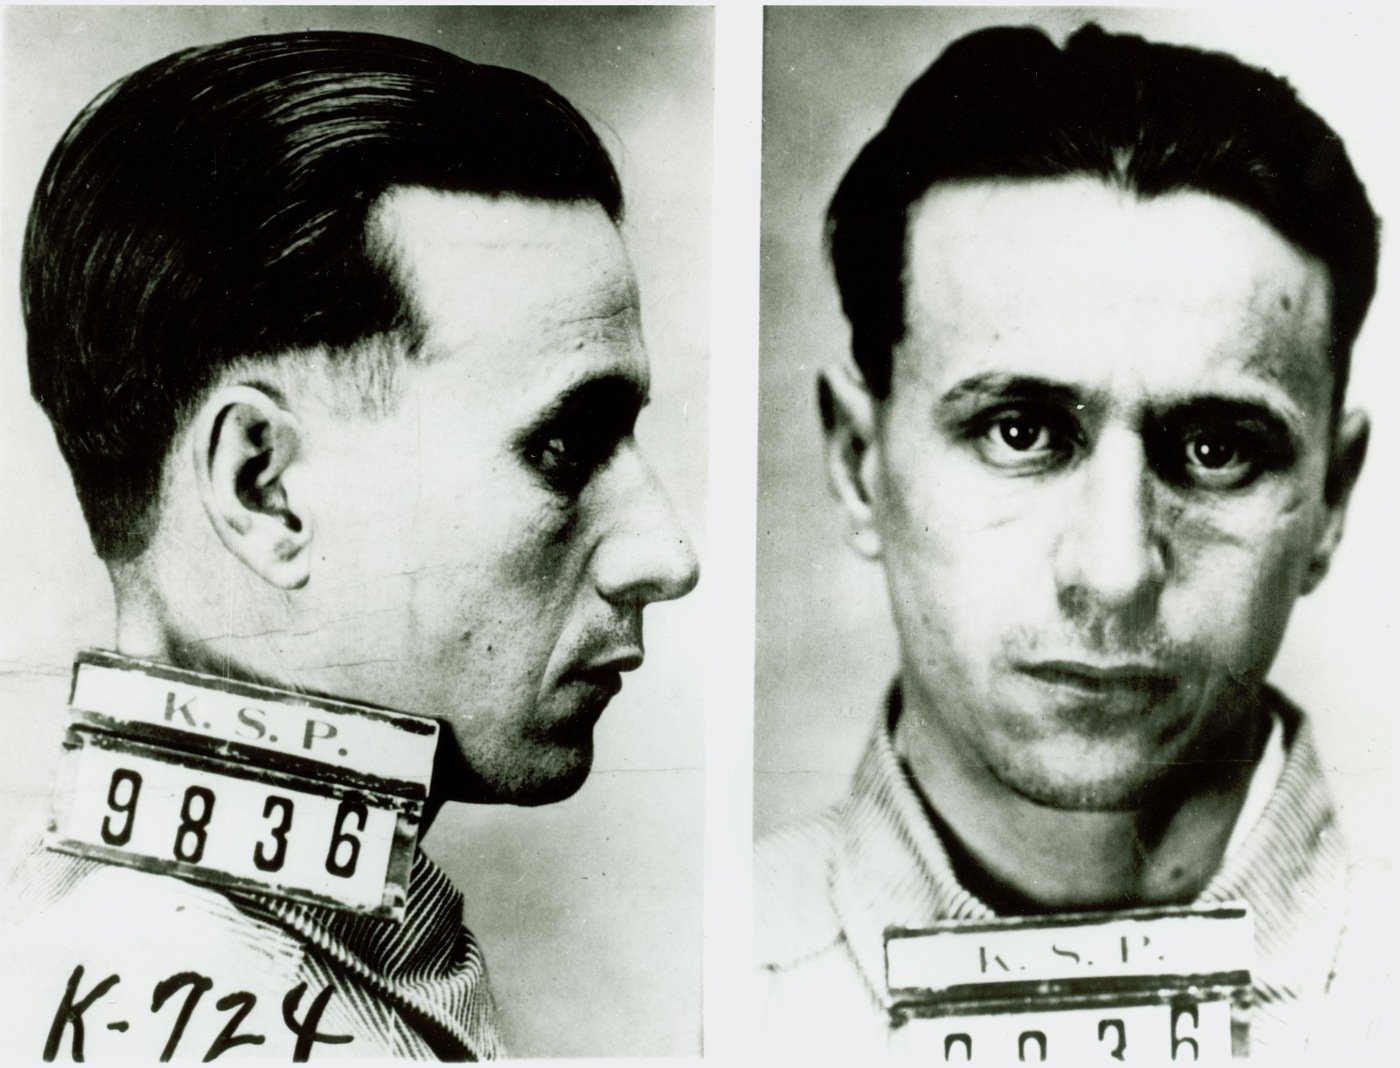 Mugshot of Fred Barker of the Barker-Karpis gang following his arrest in 1926. Fred Barker (1901-1935) was the third oldest of the Barker brothers. He died with his mother following a shootout with Bureau agents in Florida on January 16, 1935.